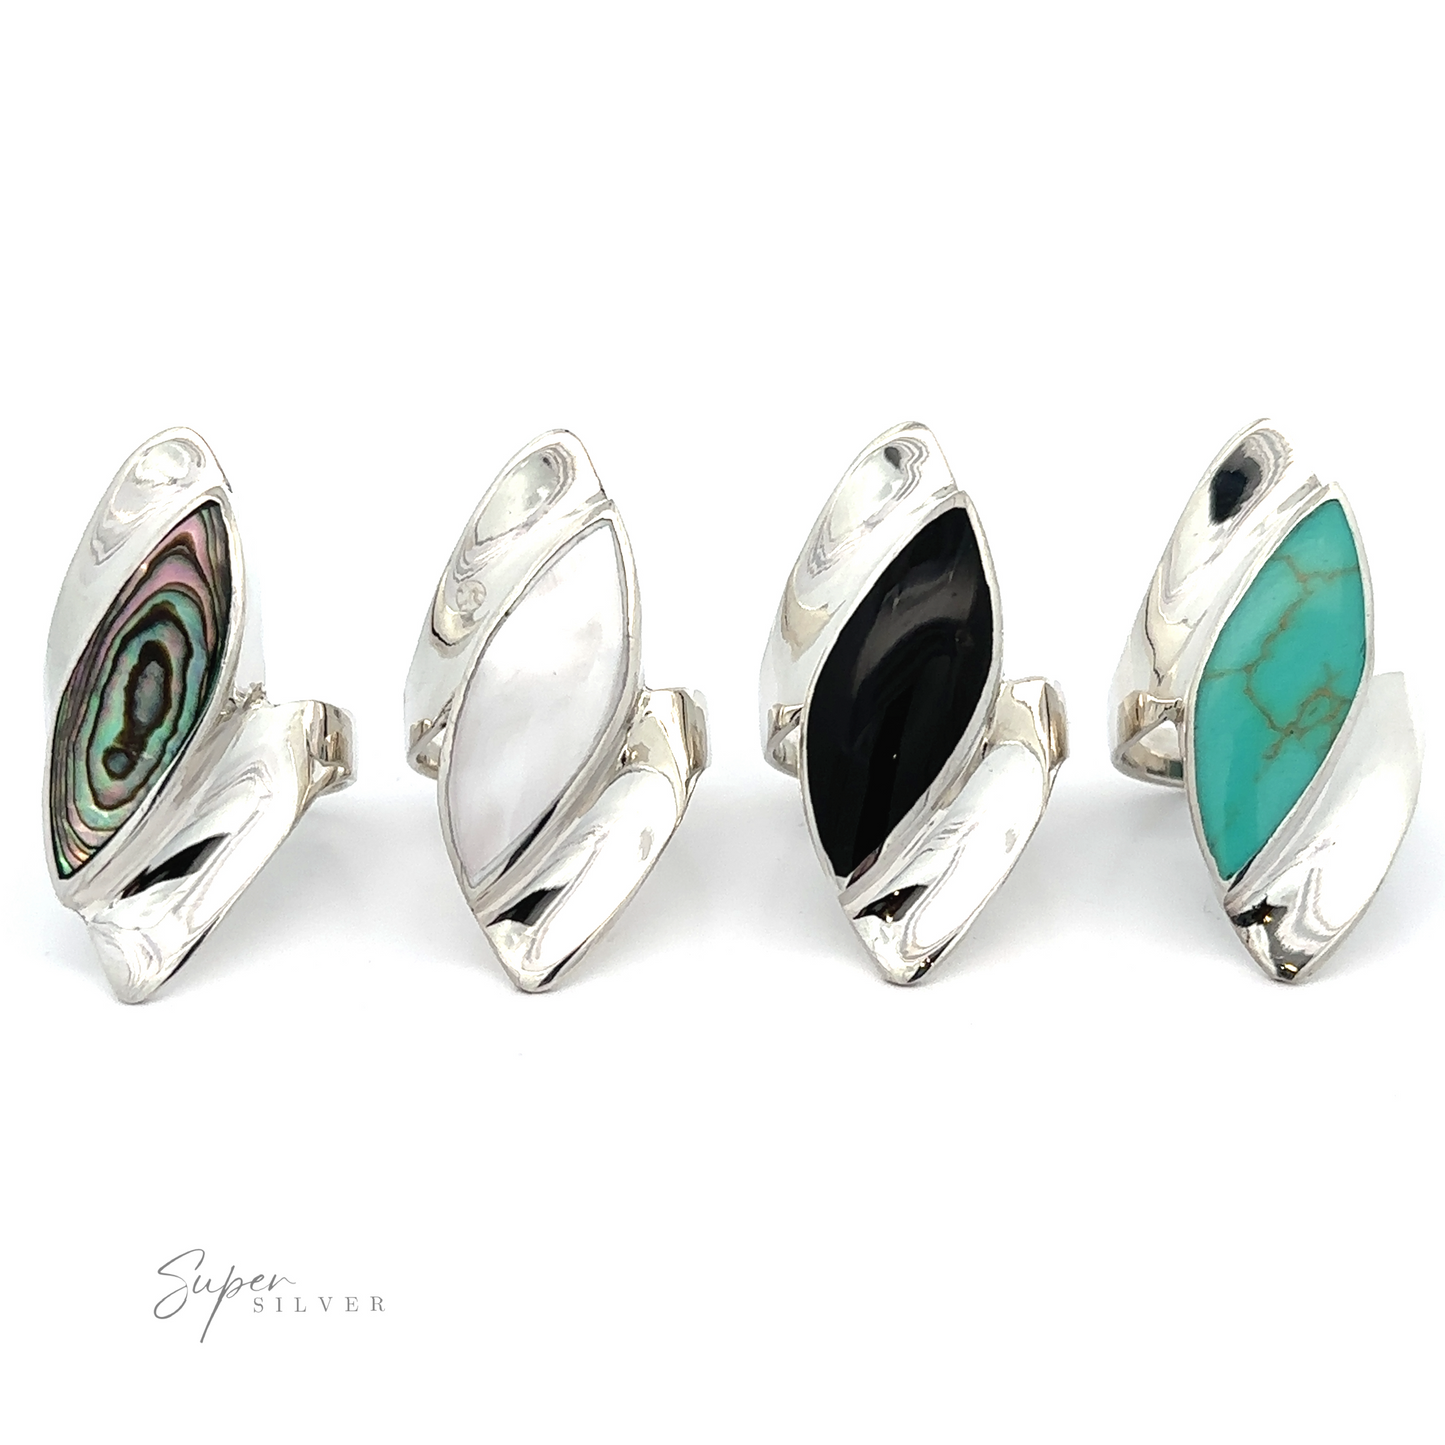 Four Modern Marquise Shaped Inlaid Stone Rings with white and turquoise stones.